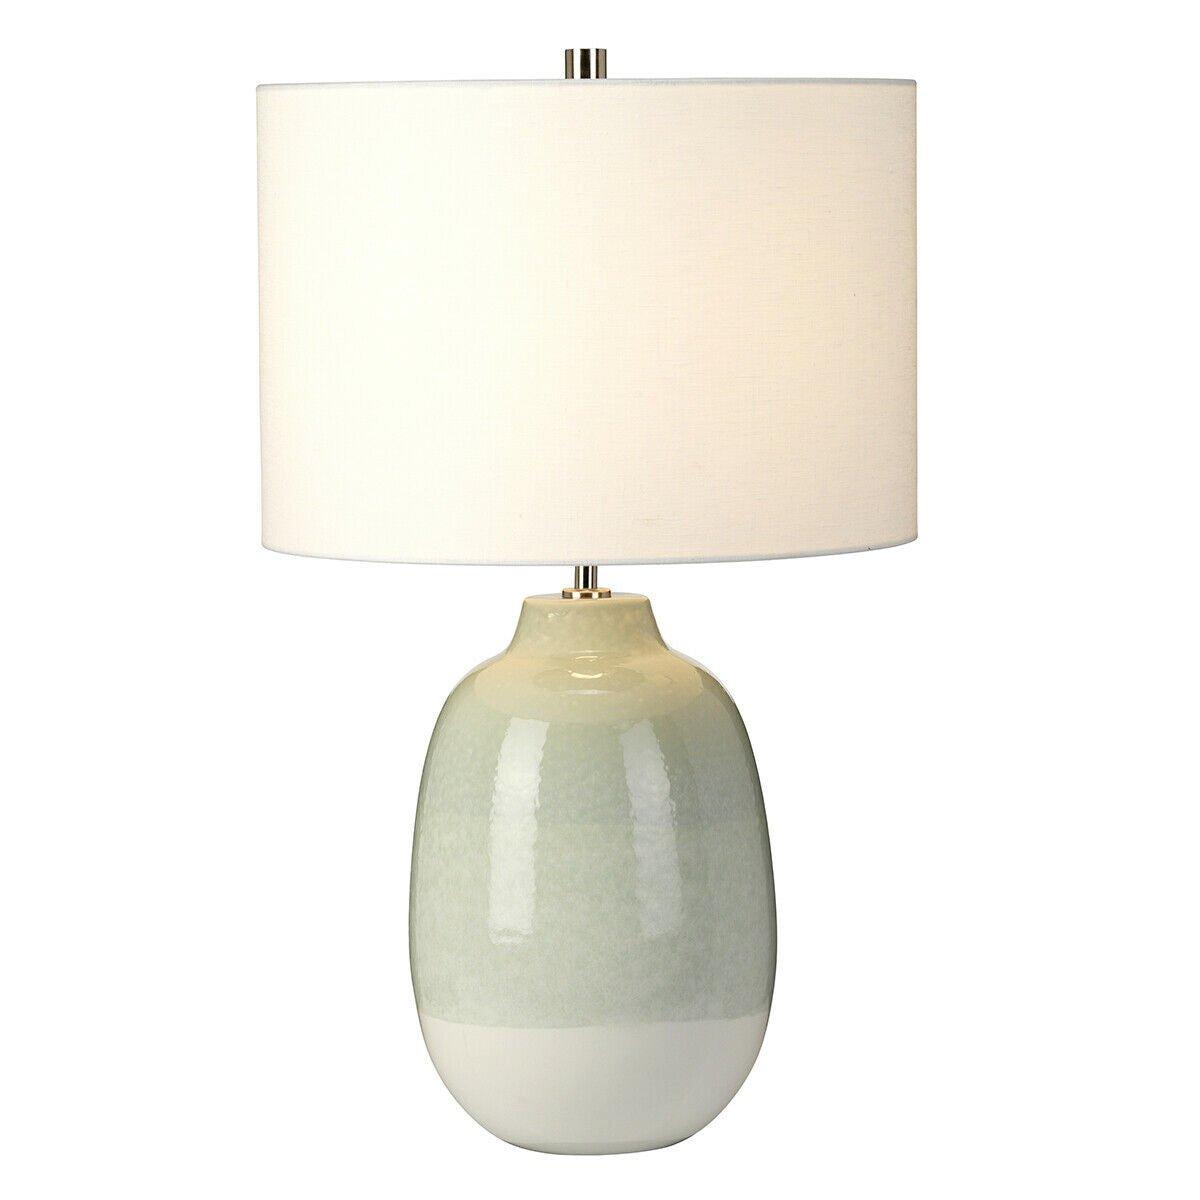 Table Lamp Pale Green to White White Faux Linen Drum Shade LED E27 60W Bulb